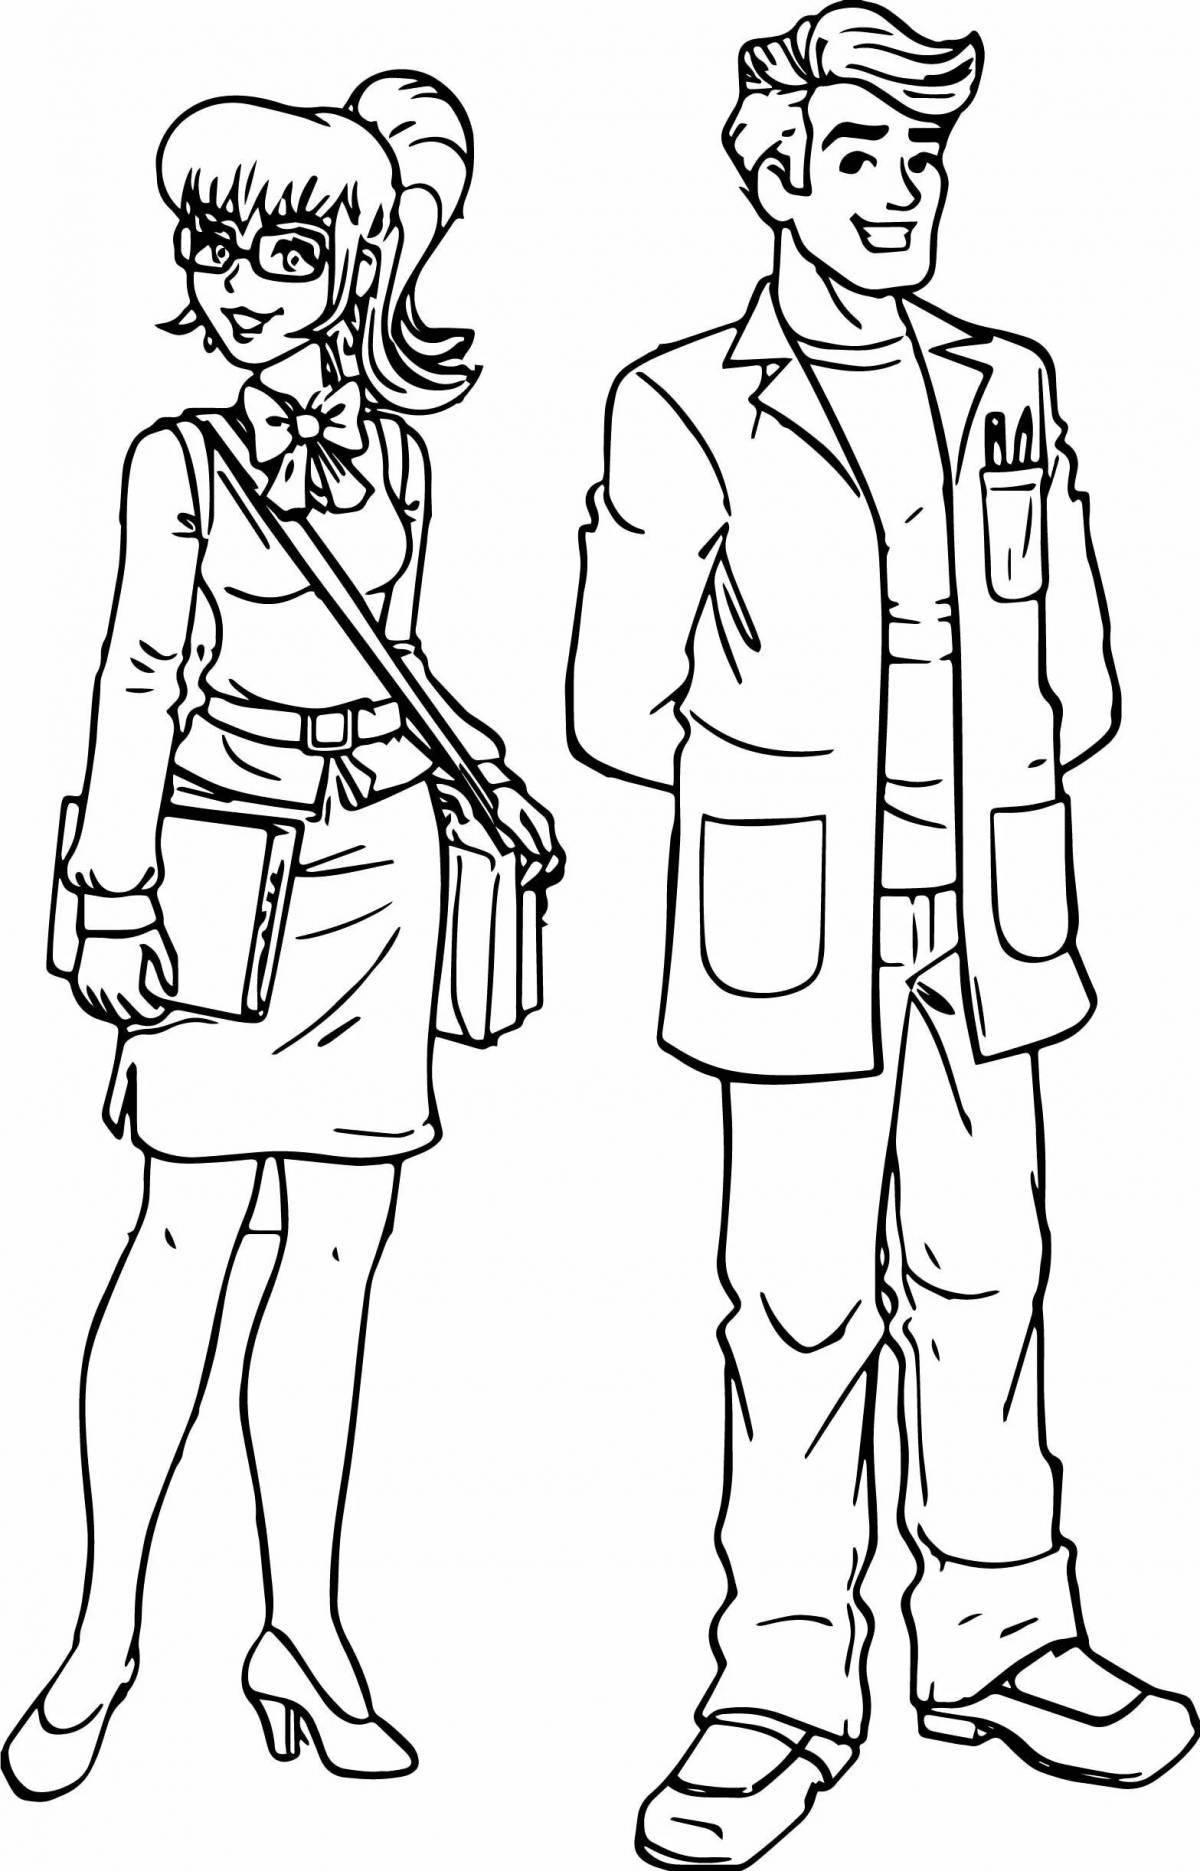 Coloring page living woman and man